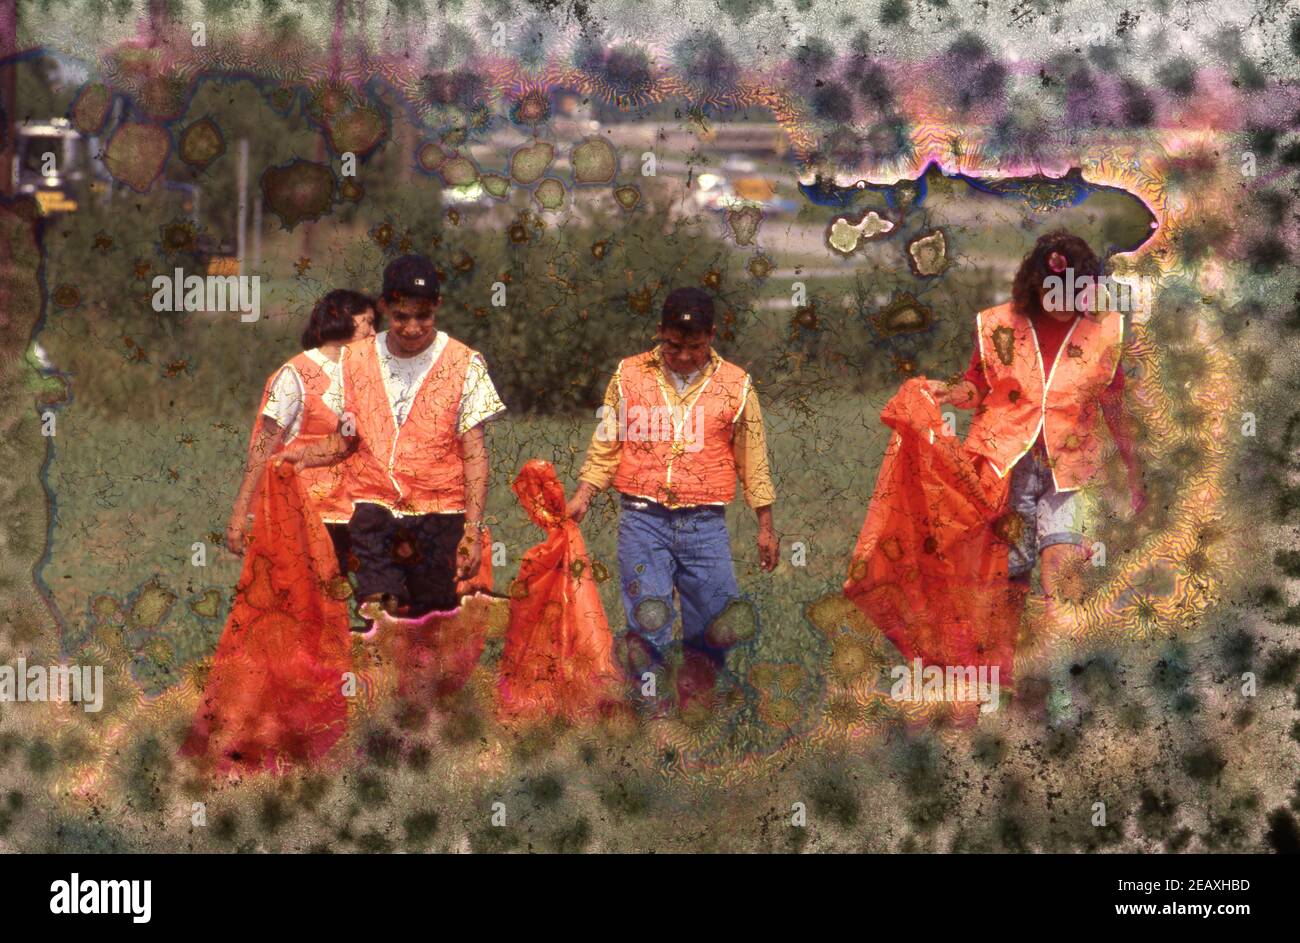 New Braunfels, Texas USA: Students in high school ROTC program participate in volunteer project of cleaning up roadside litter. ©Bob Daemmrich BAD3238D Stock Photo